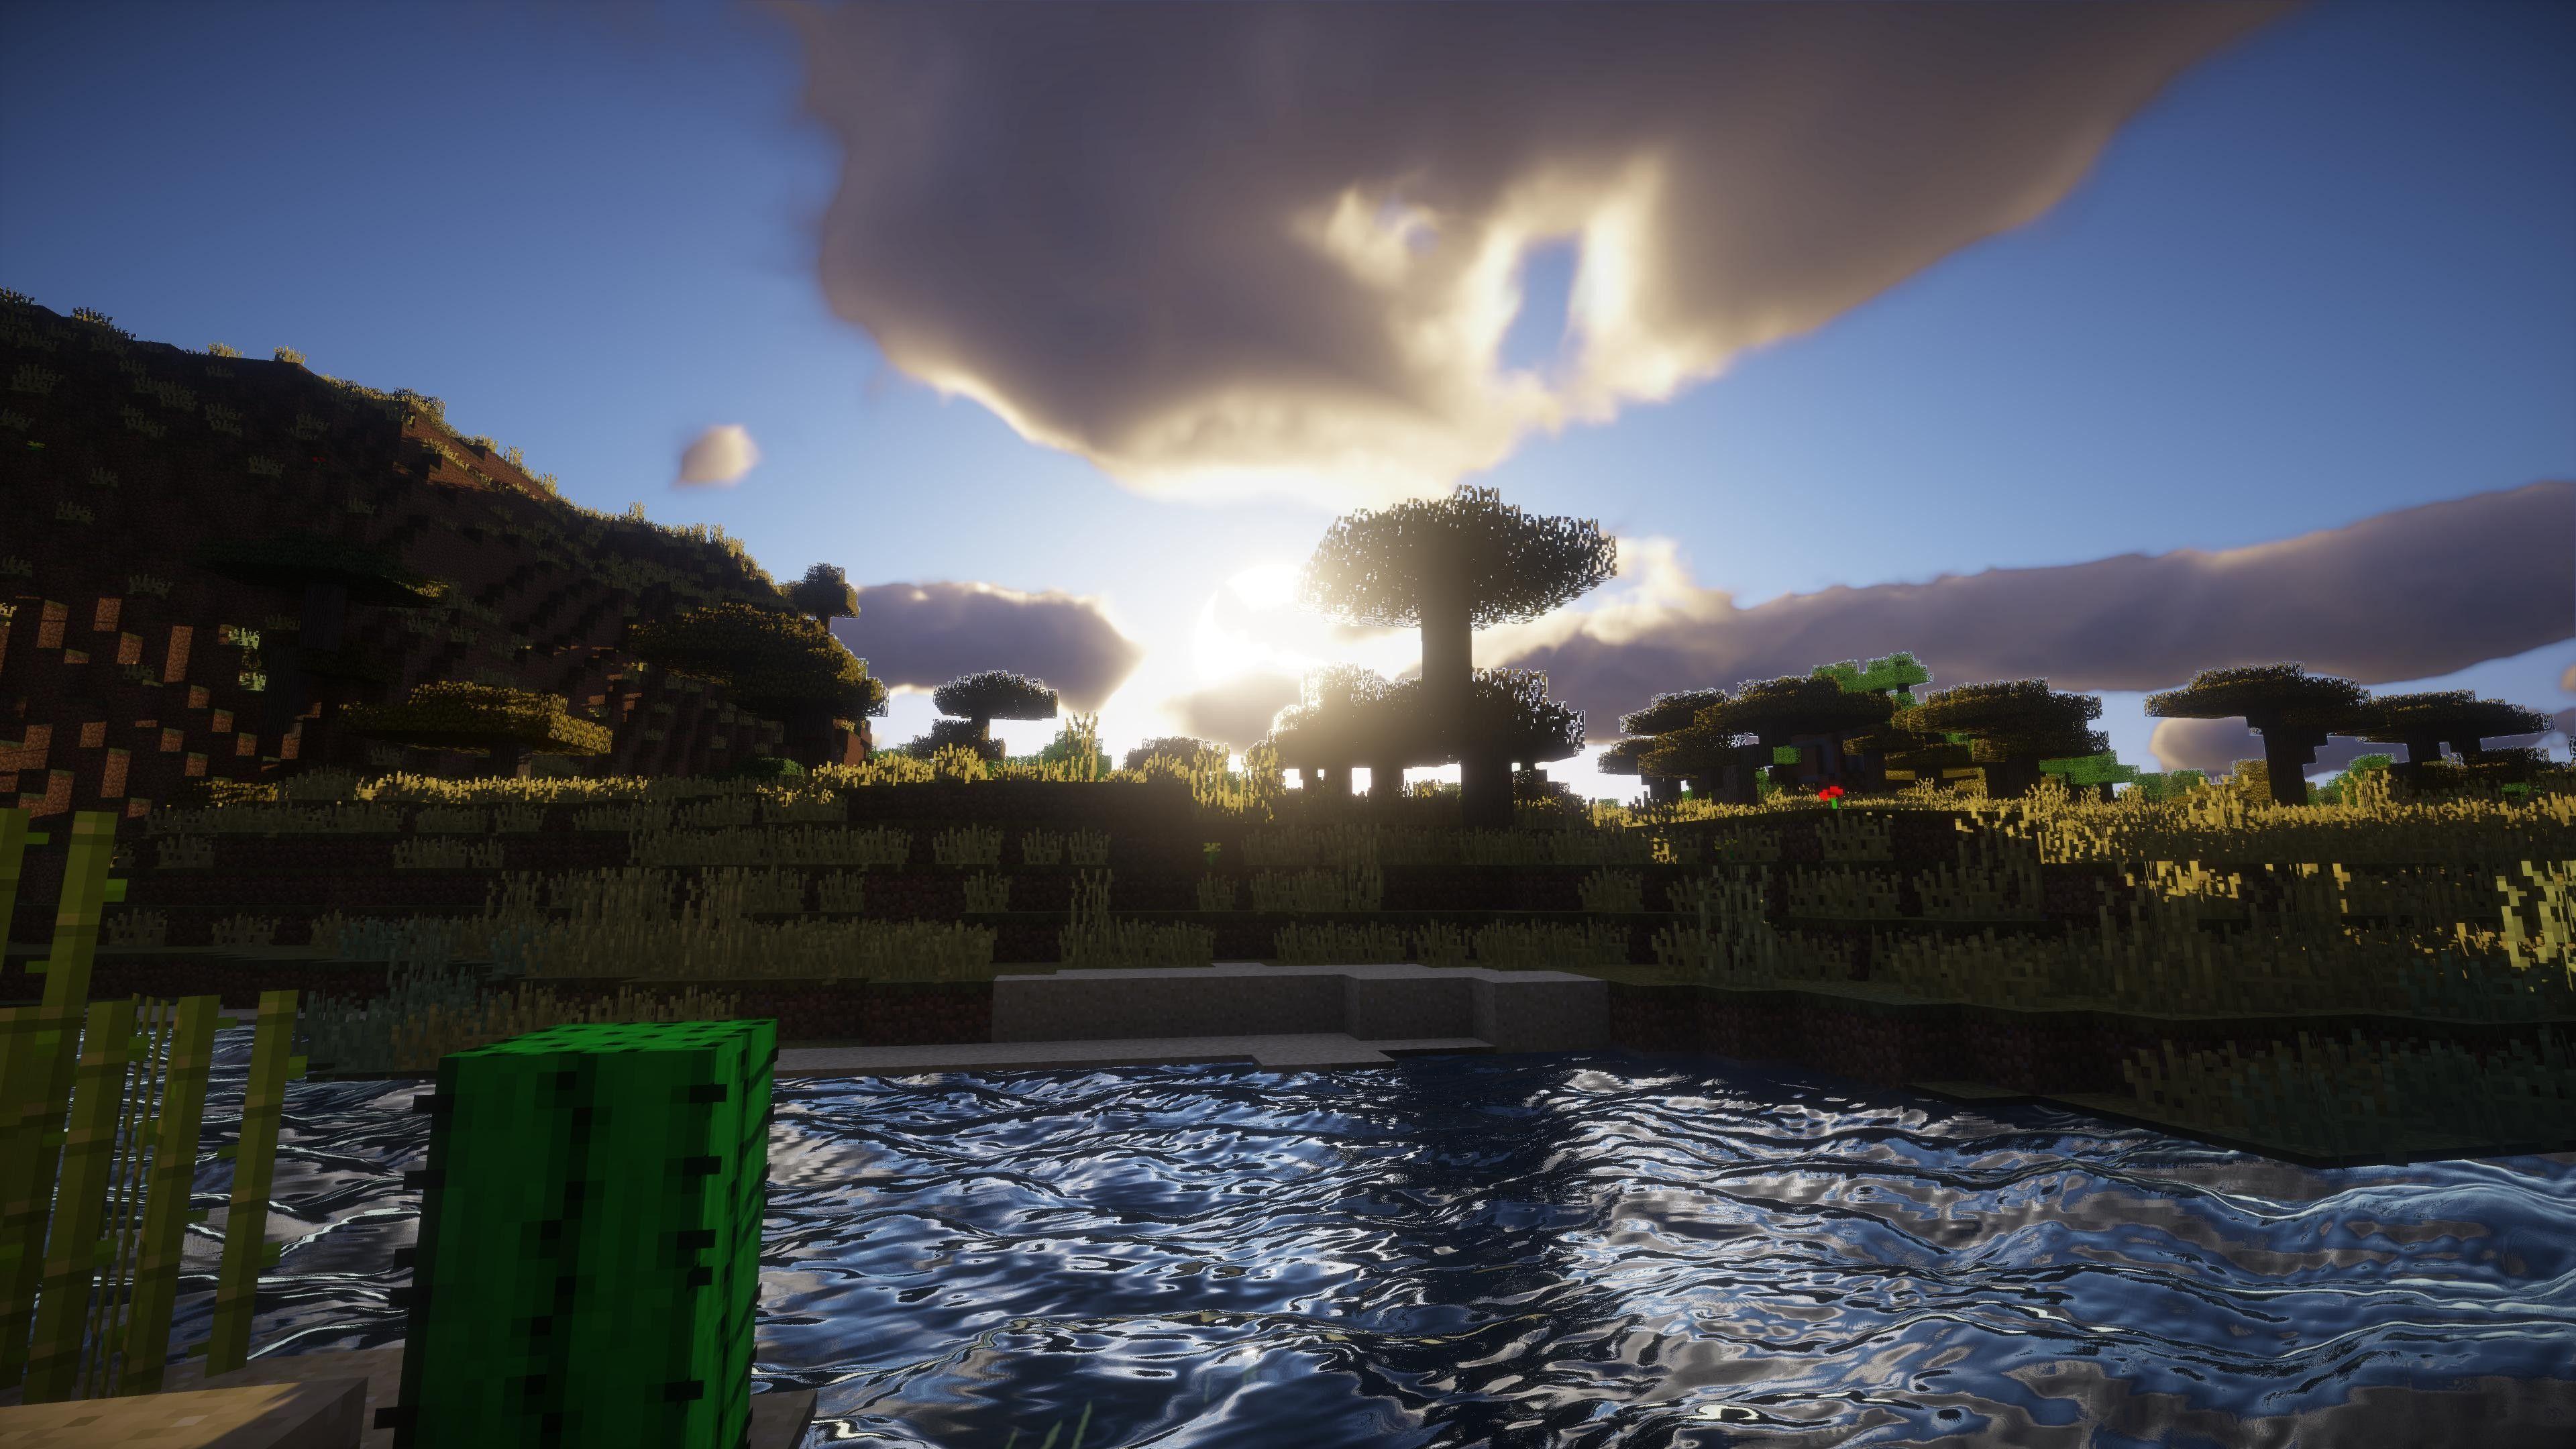 minecraft scenery with shaders